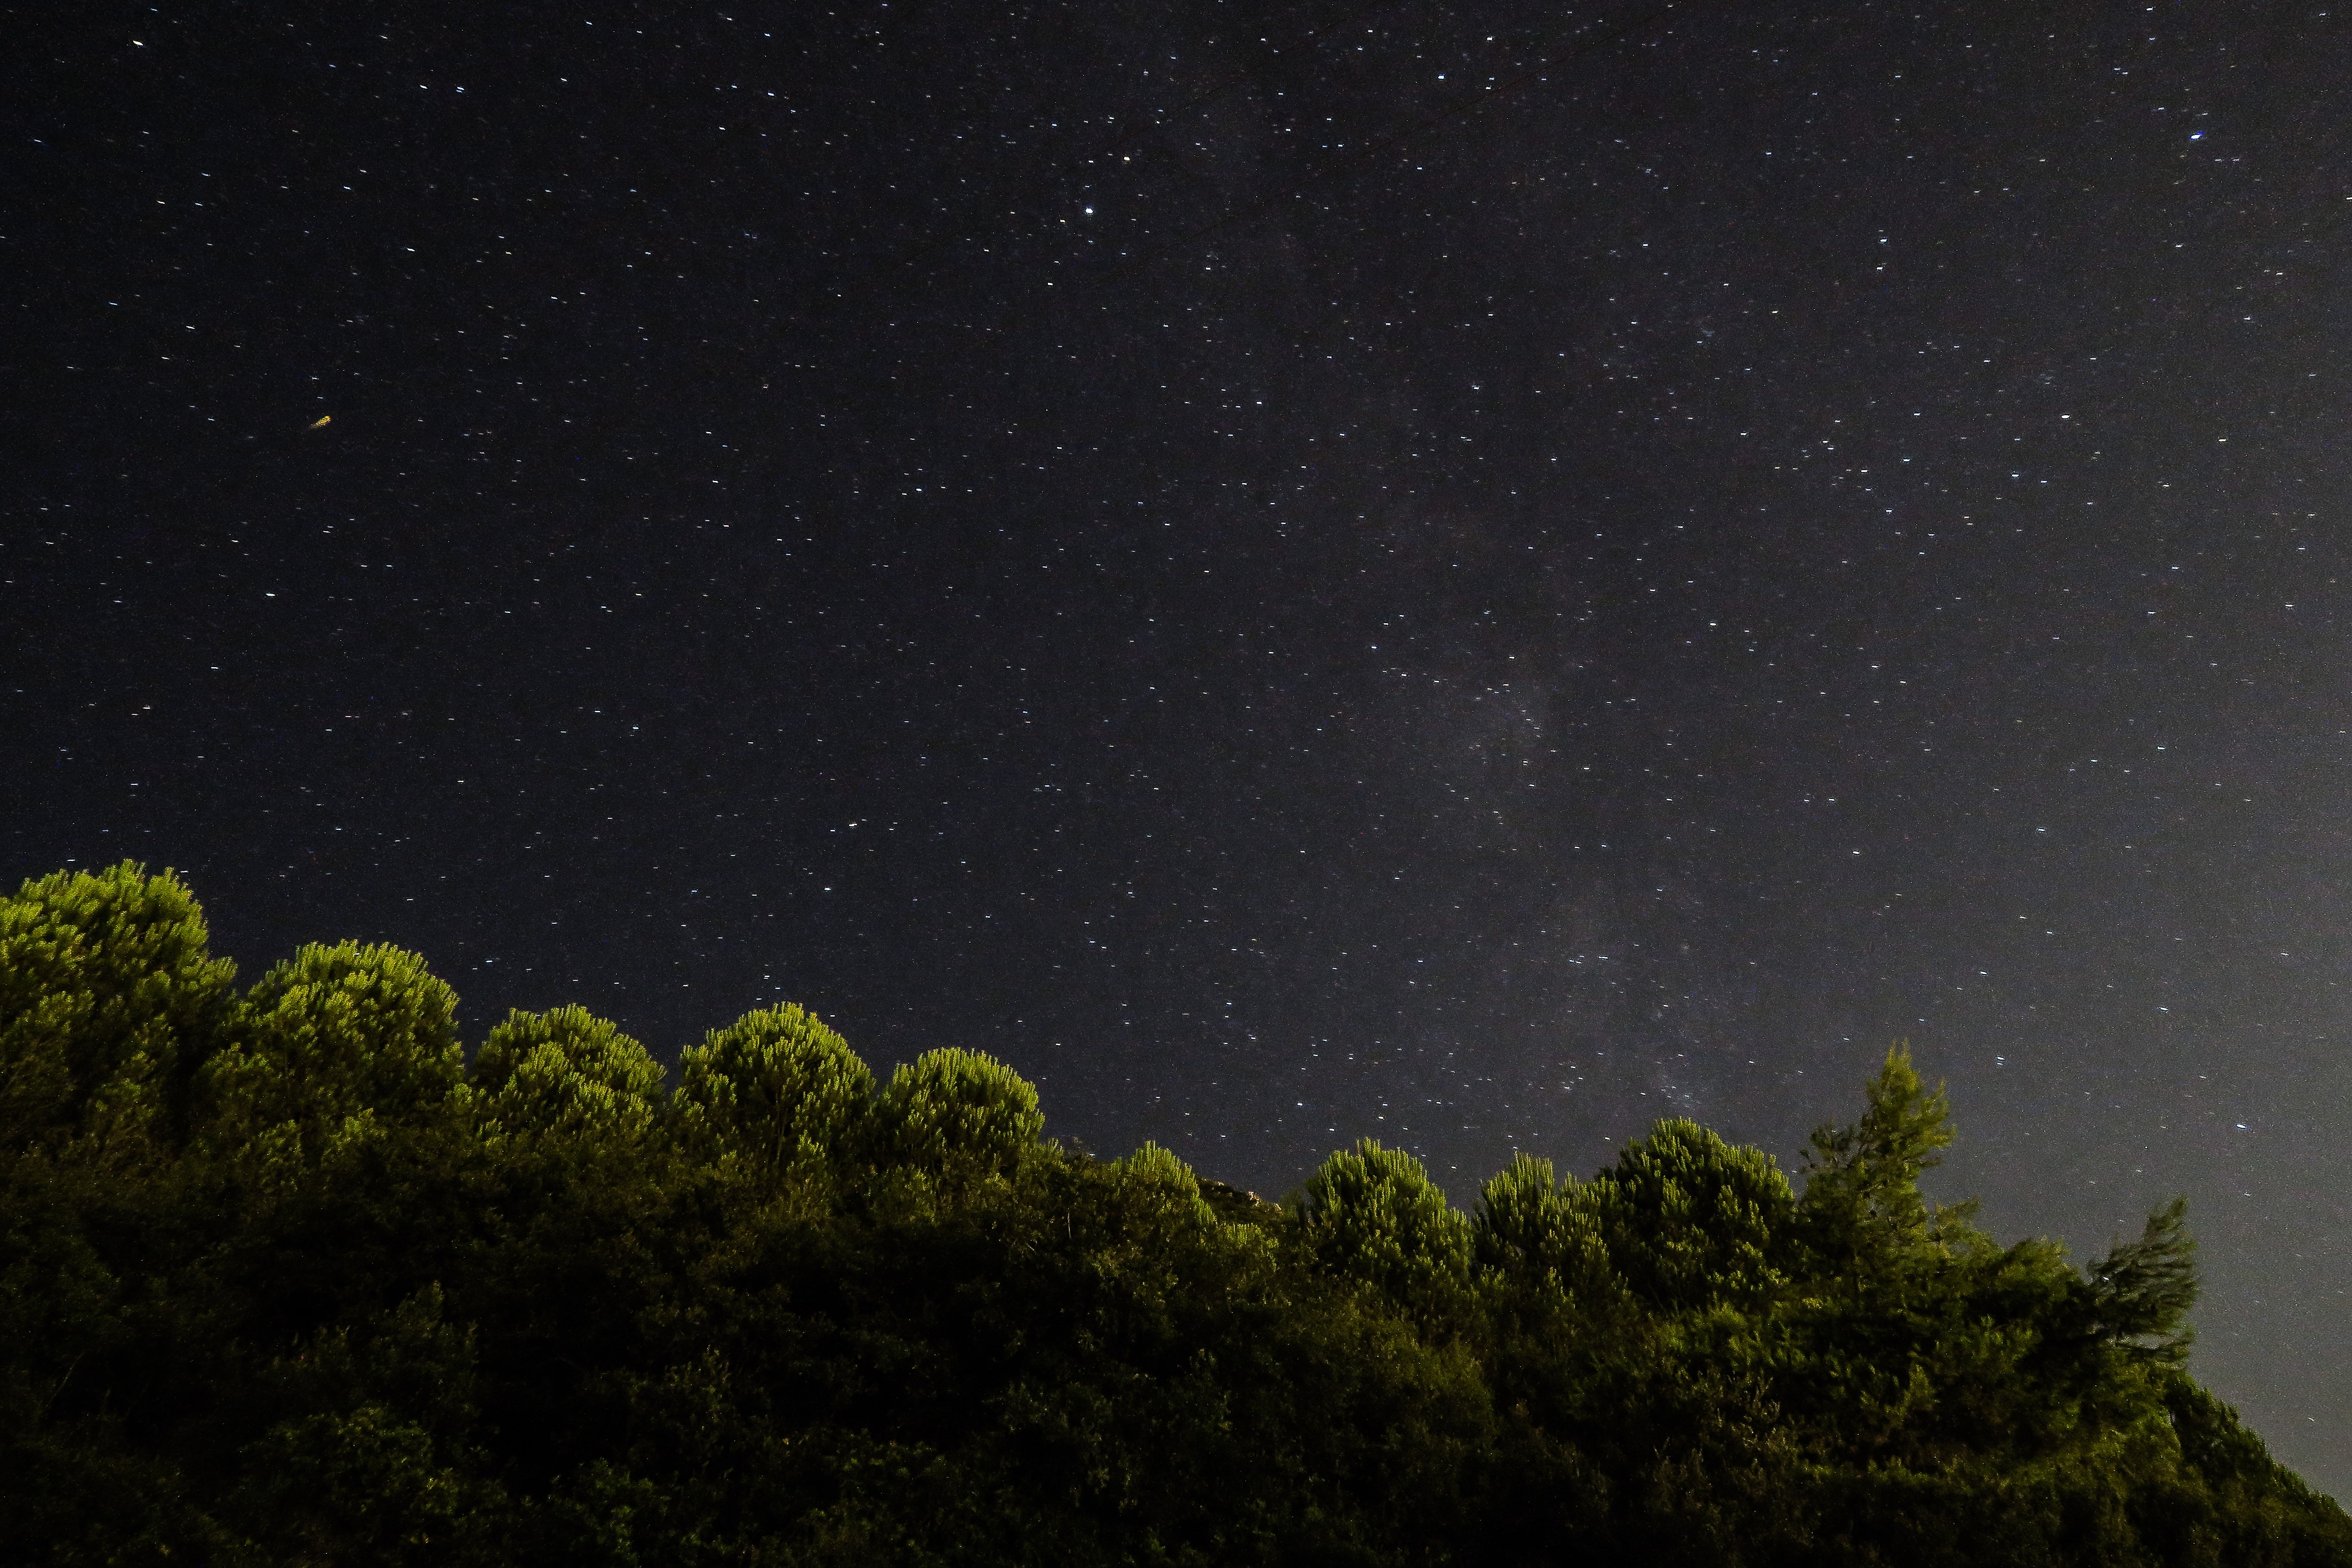 General 5472x3648 nature trees night stars Milky Way photography